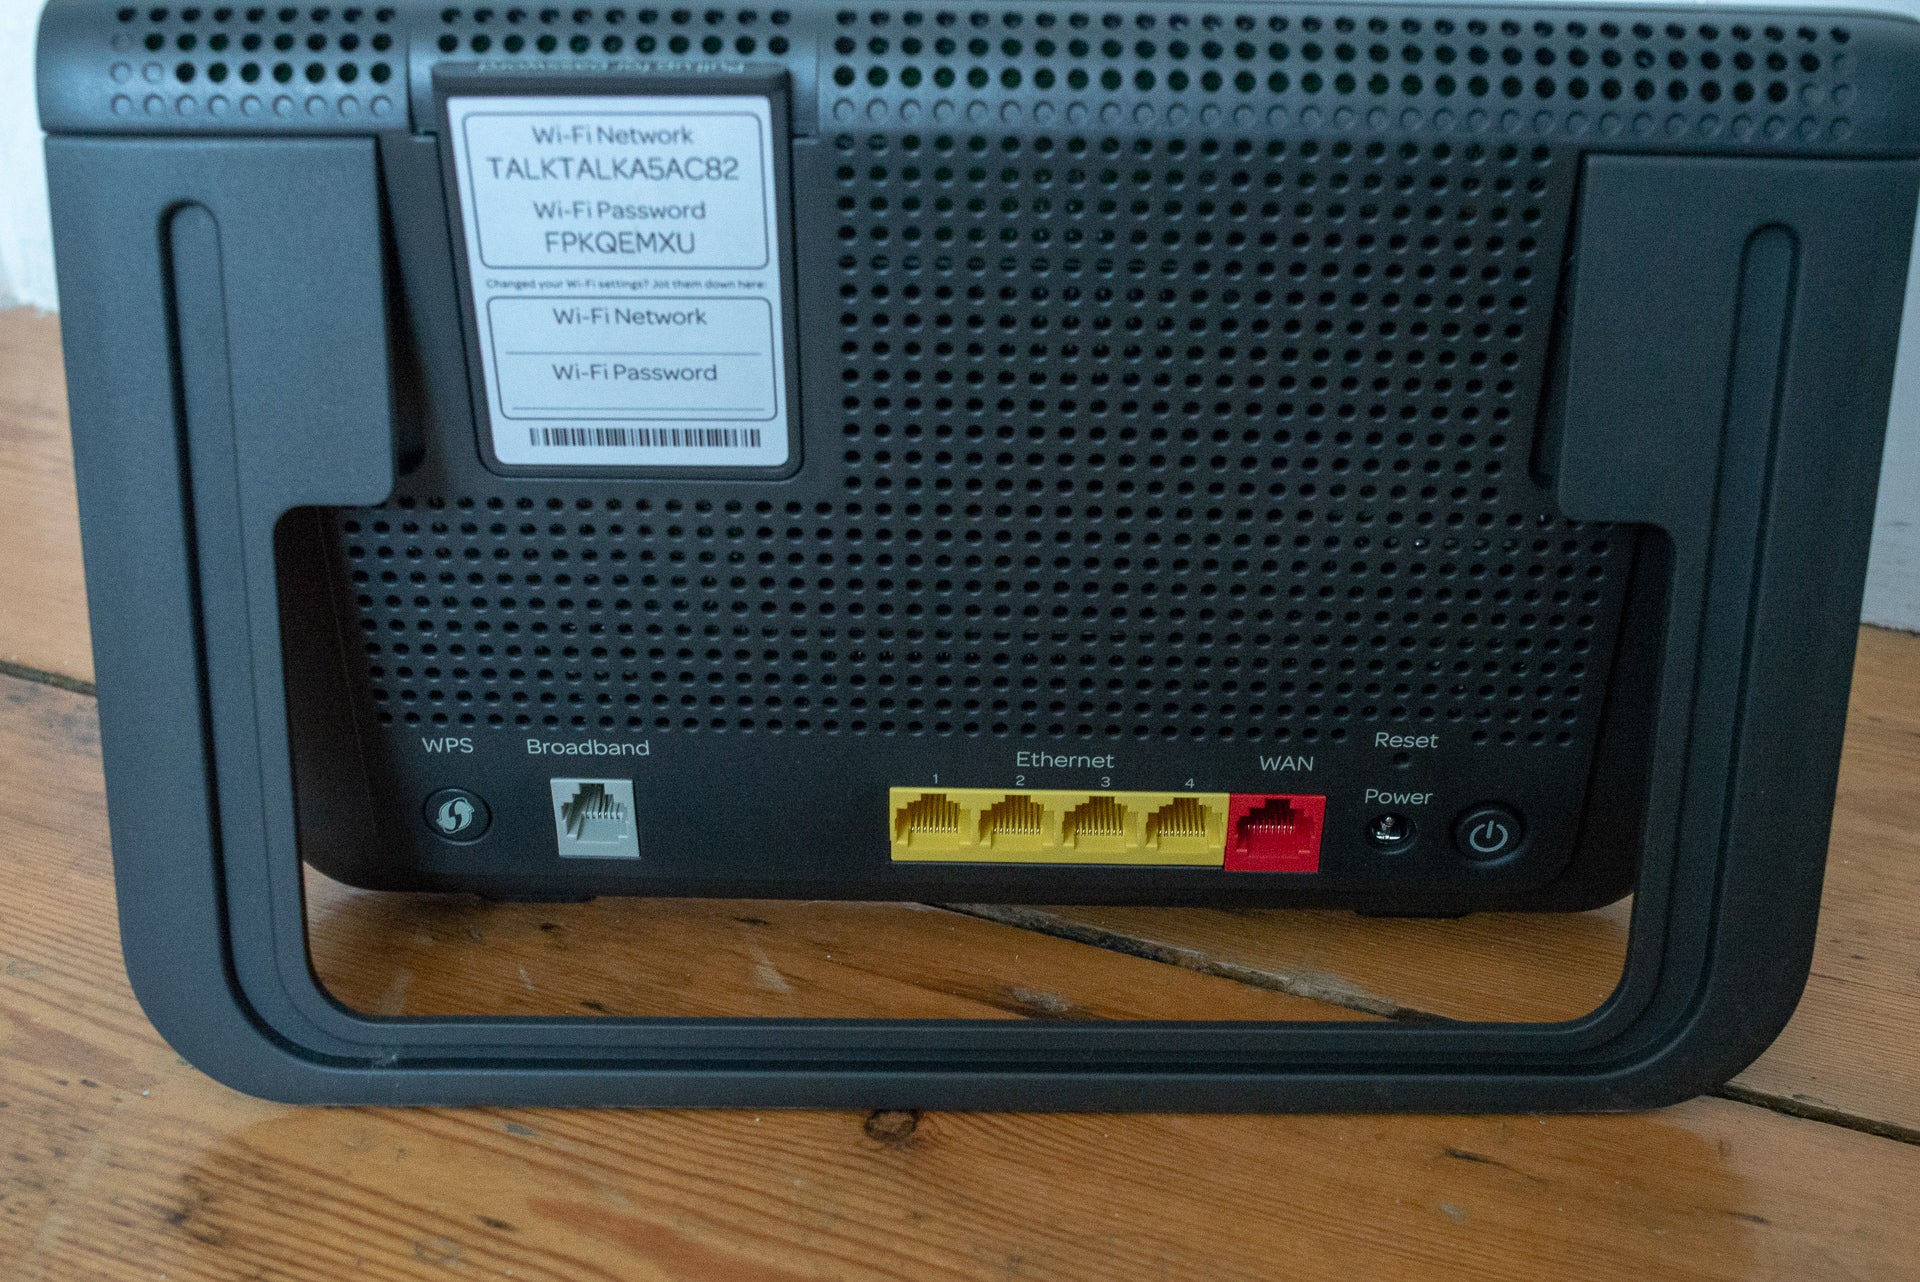 TalkTalk Wi-Fi Hub router with ports and buttons visible